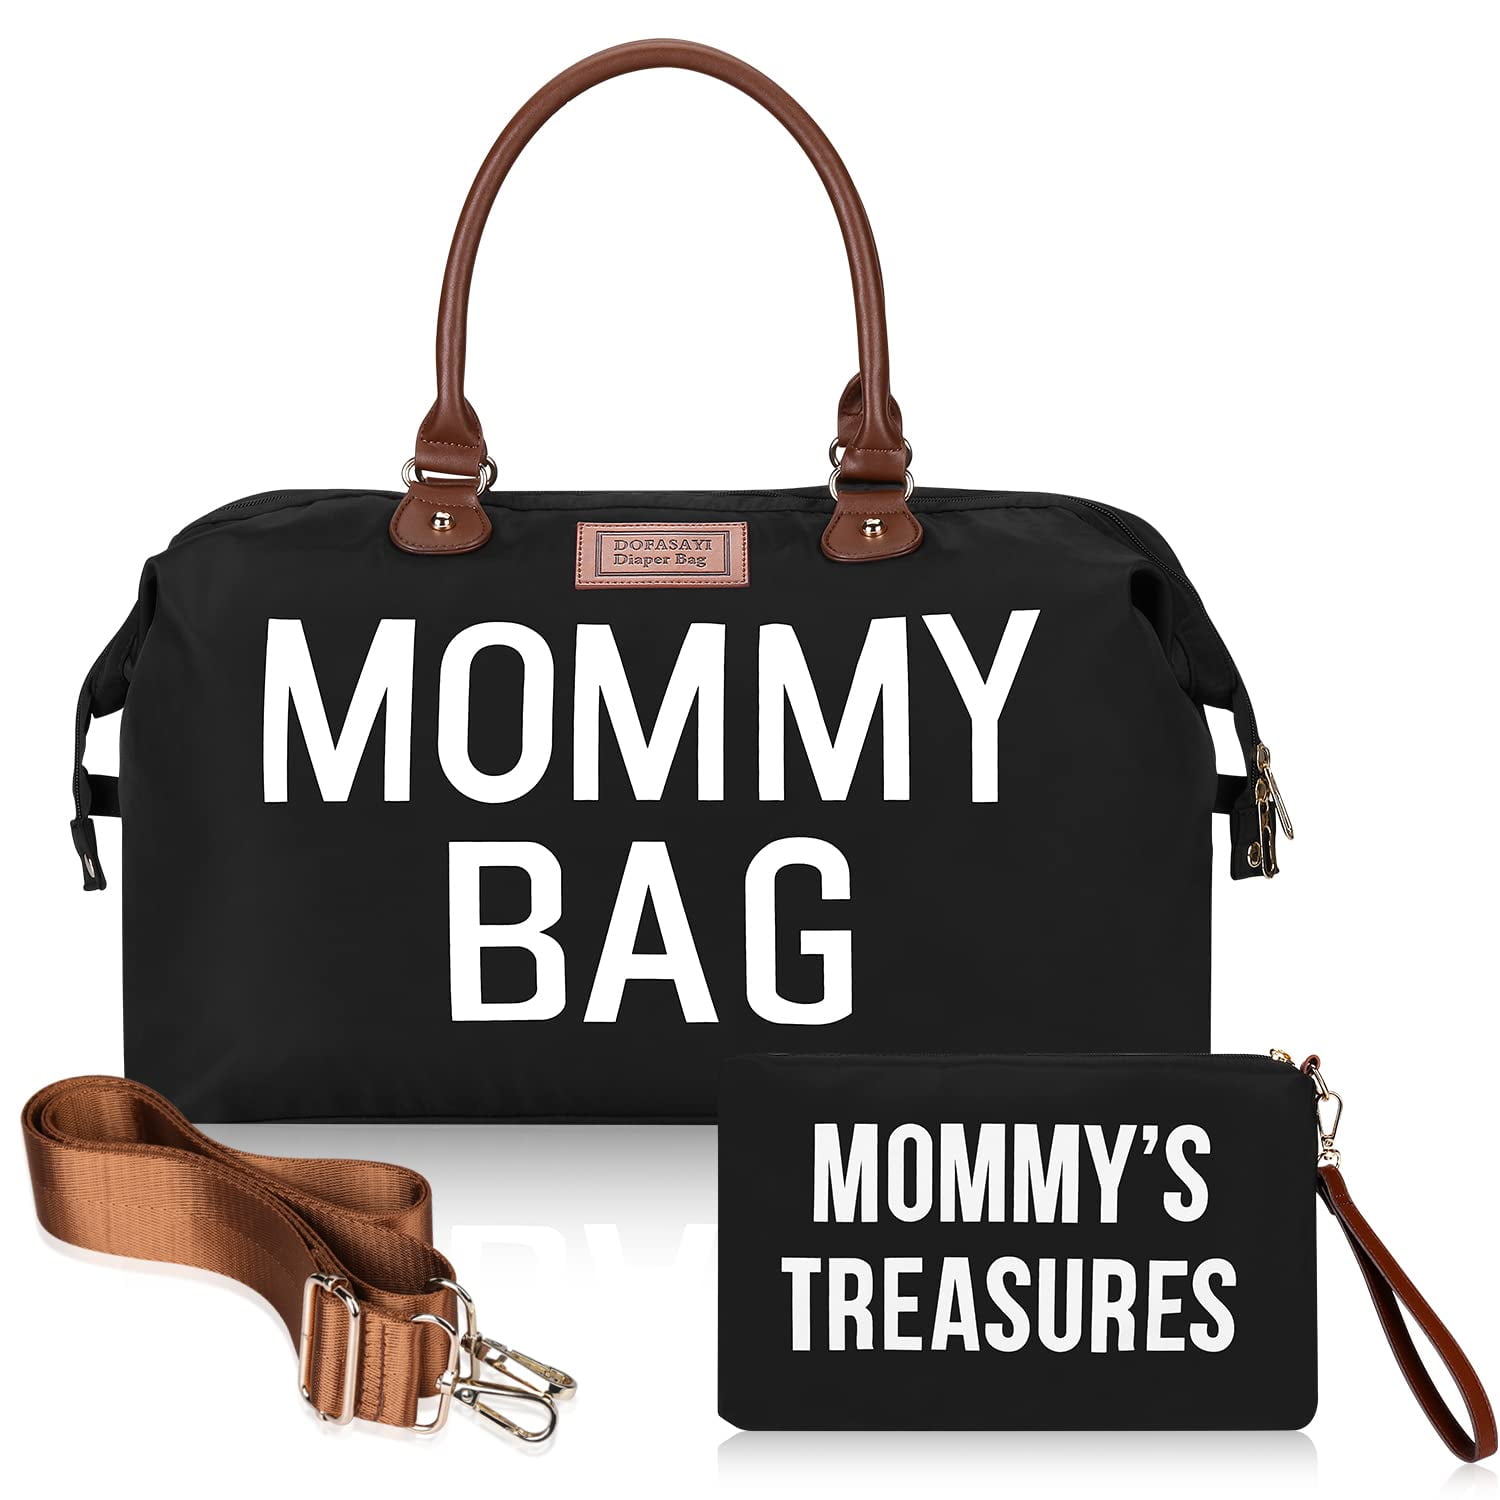 Mommy Bag for Hospital, Diaper Bag with Mommy's Treasures Bag and Shoulder  Straps, Large Travel Diaper Tote for Mom and Dad, Multifunction Baby Bag